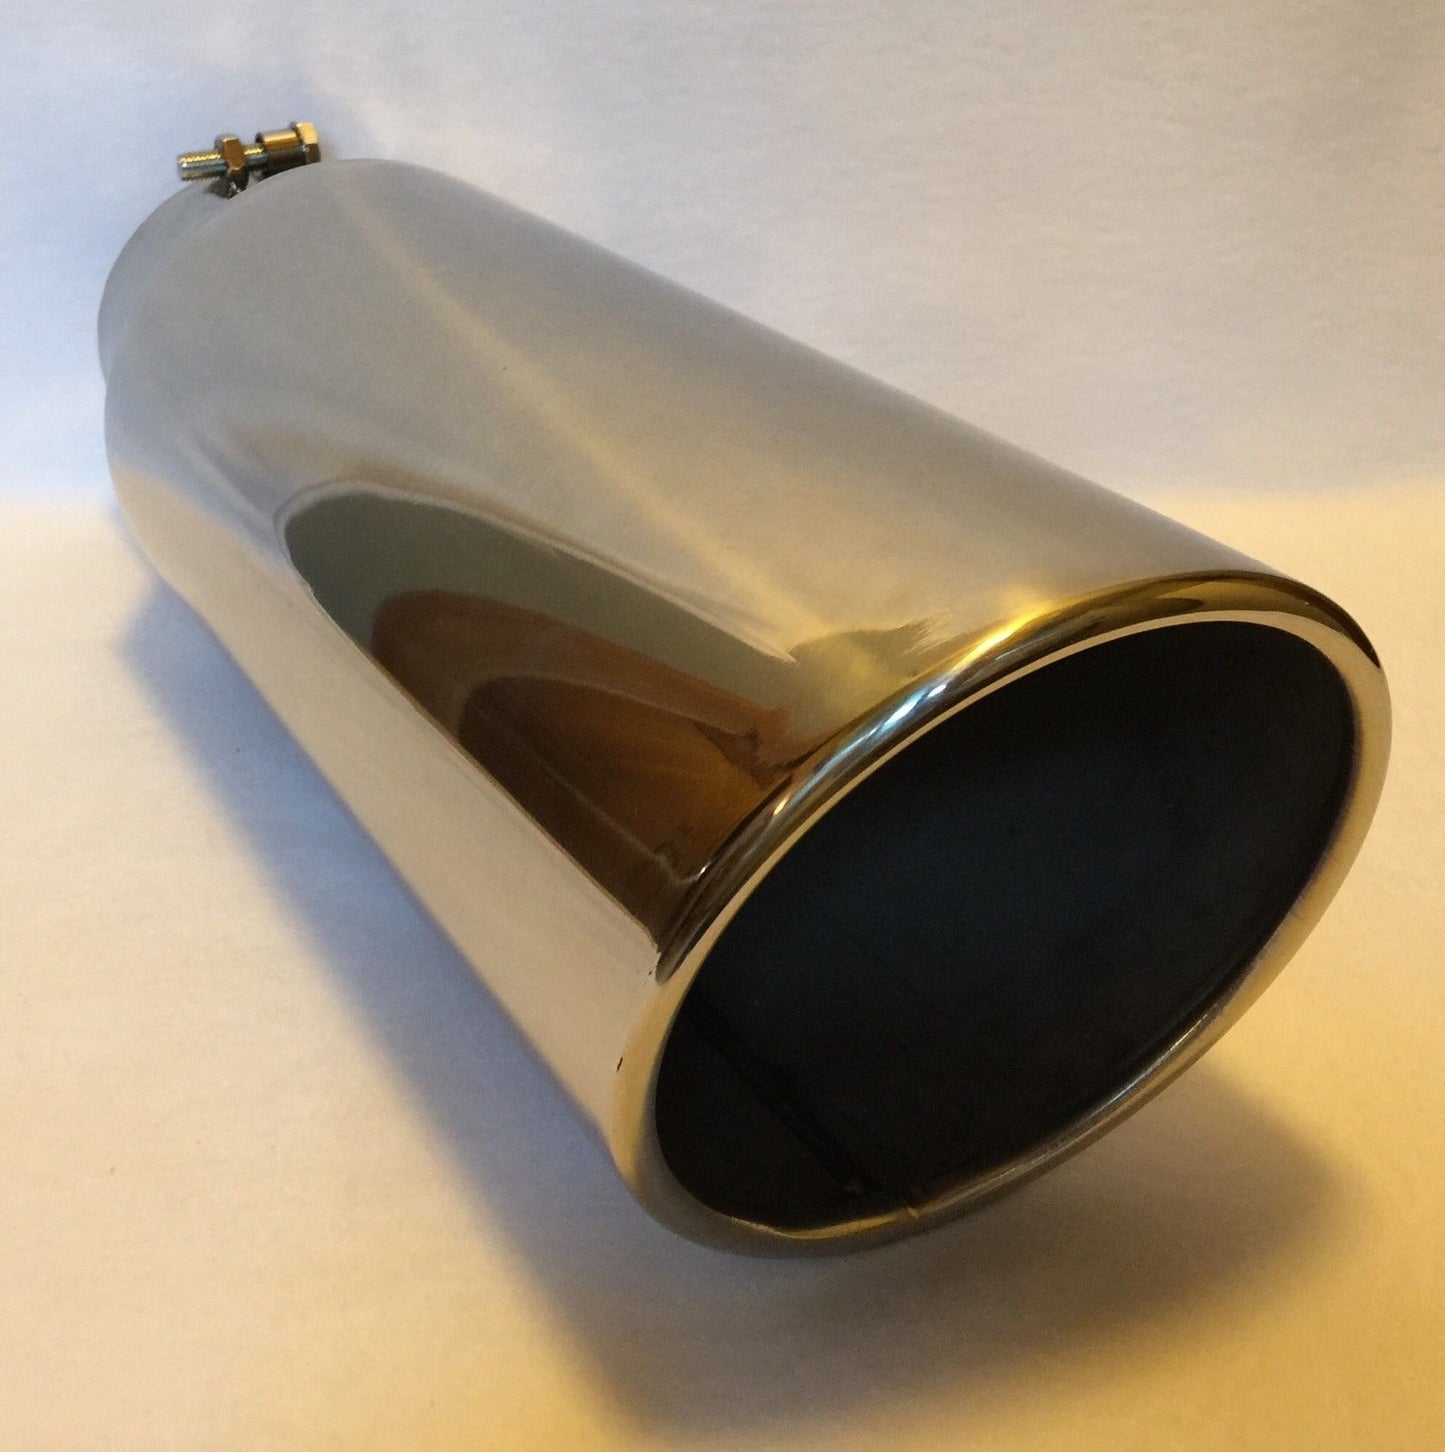 CHEVY DURAMAX 6.6L 4" IN x 6" OUT x 18" LONG POLISHED STAINLESS EXHAUST TIP